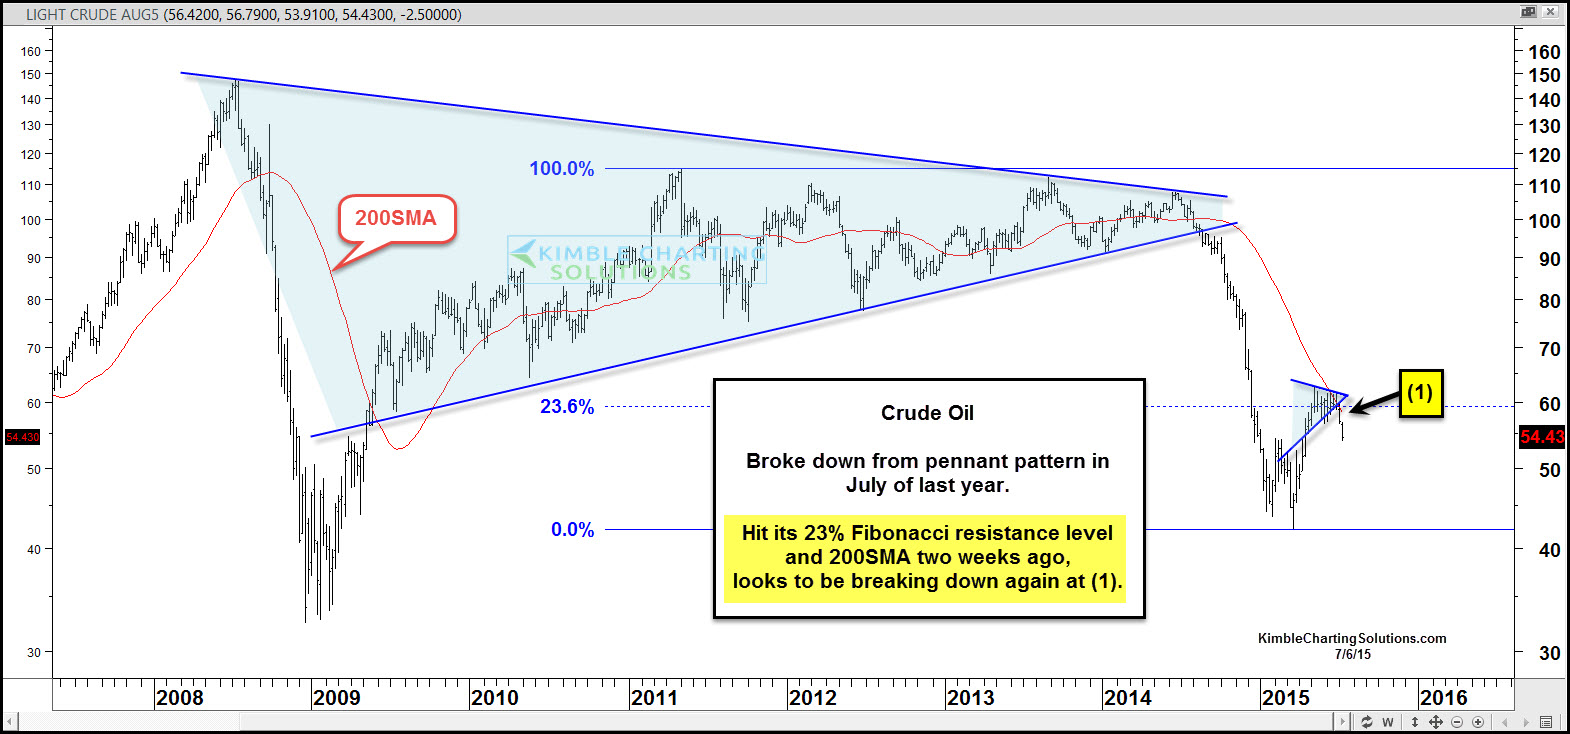 Monthly Crude Oil